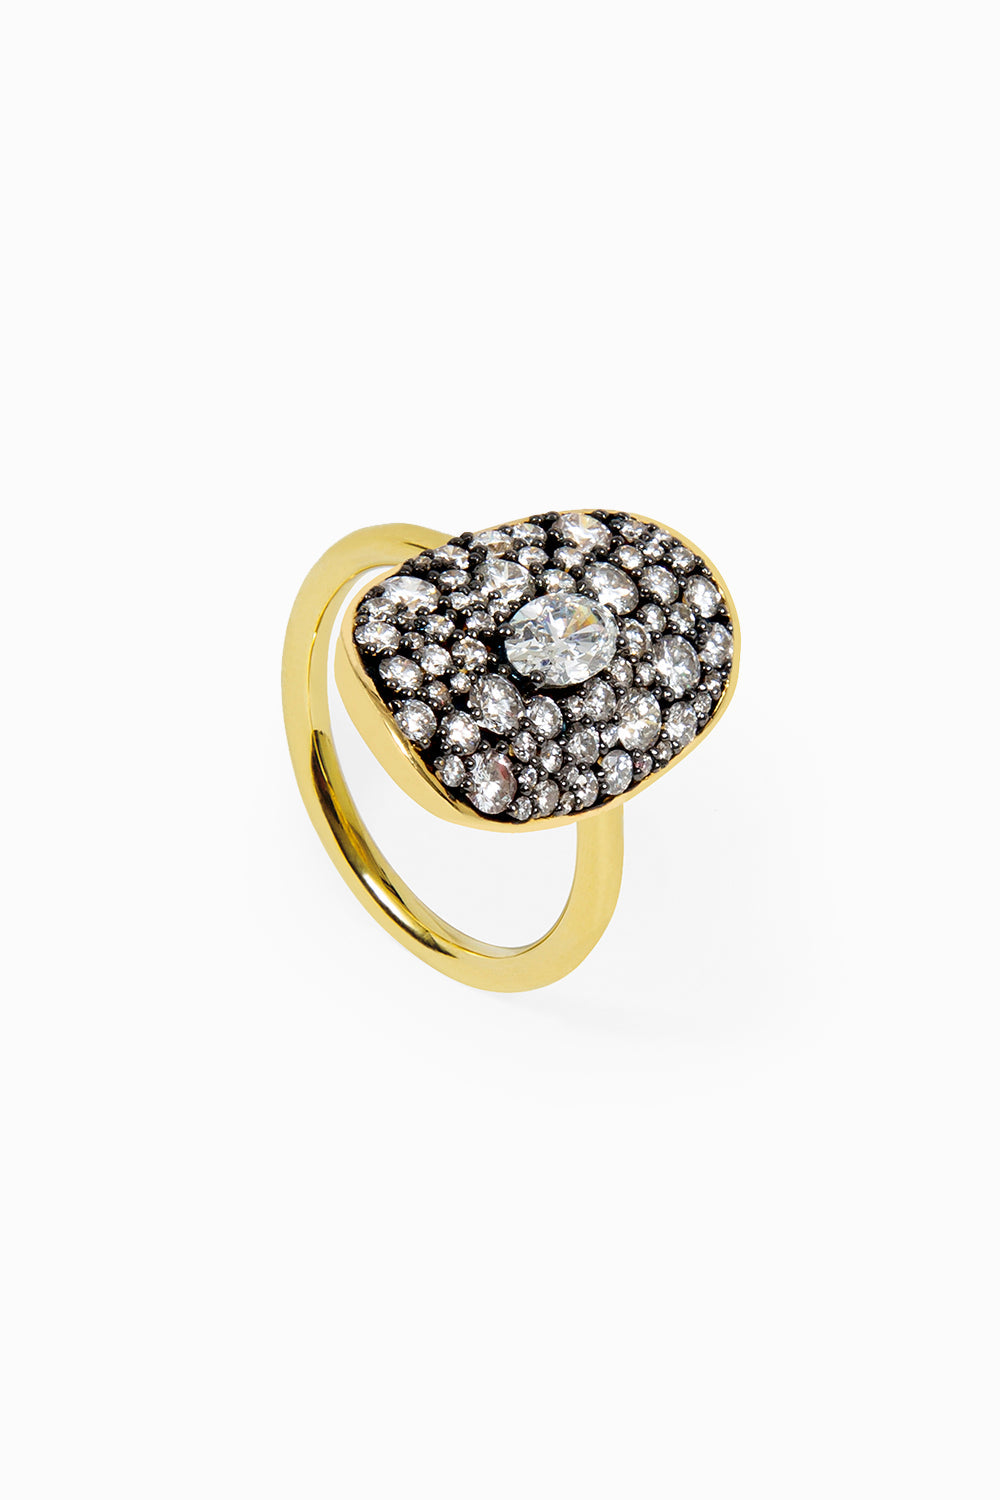 Yellow gold and black rhodium oval ring